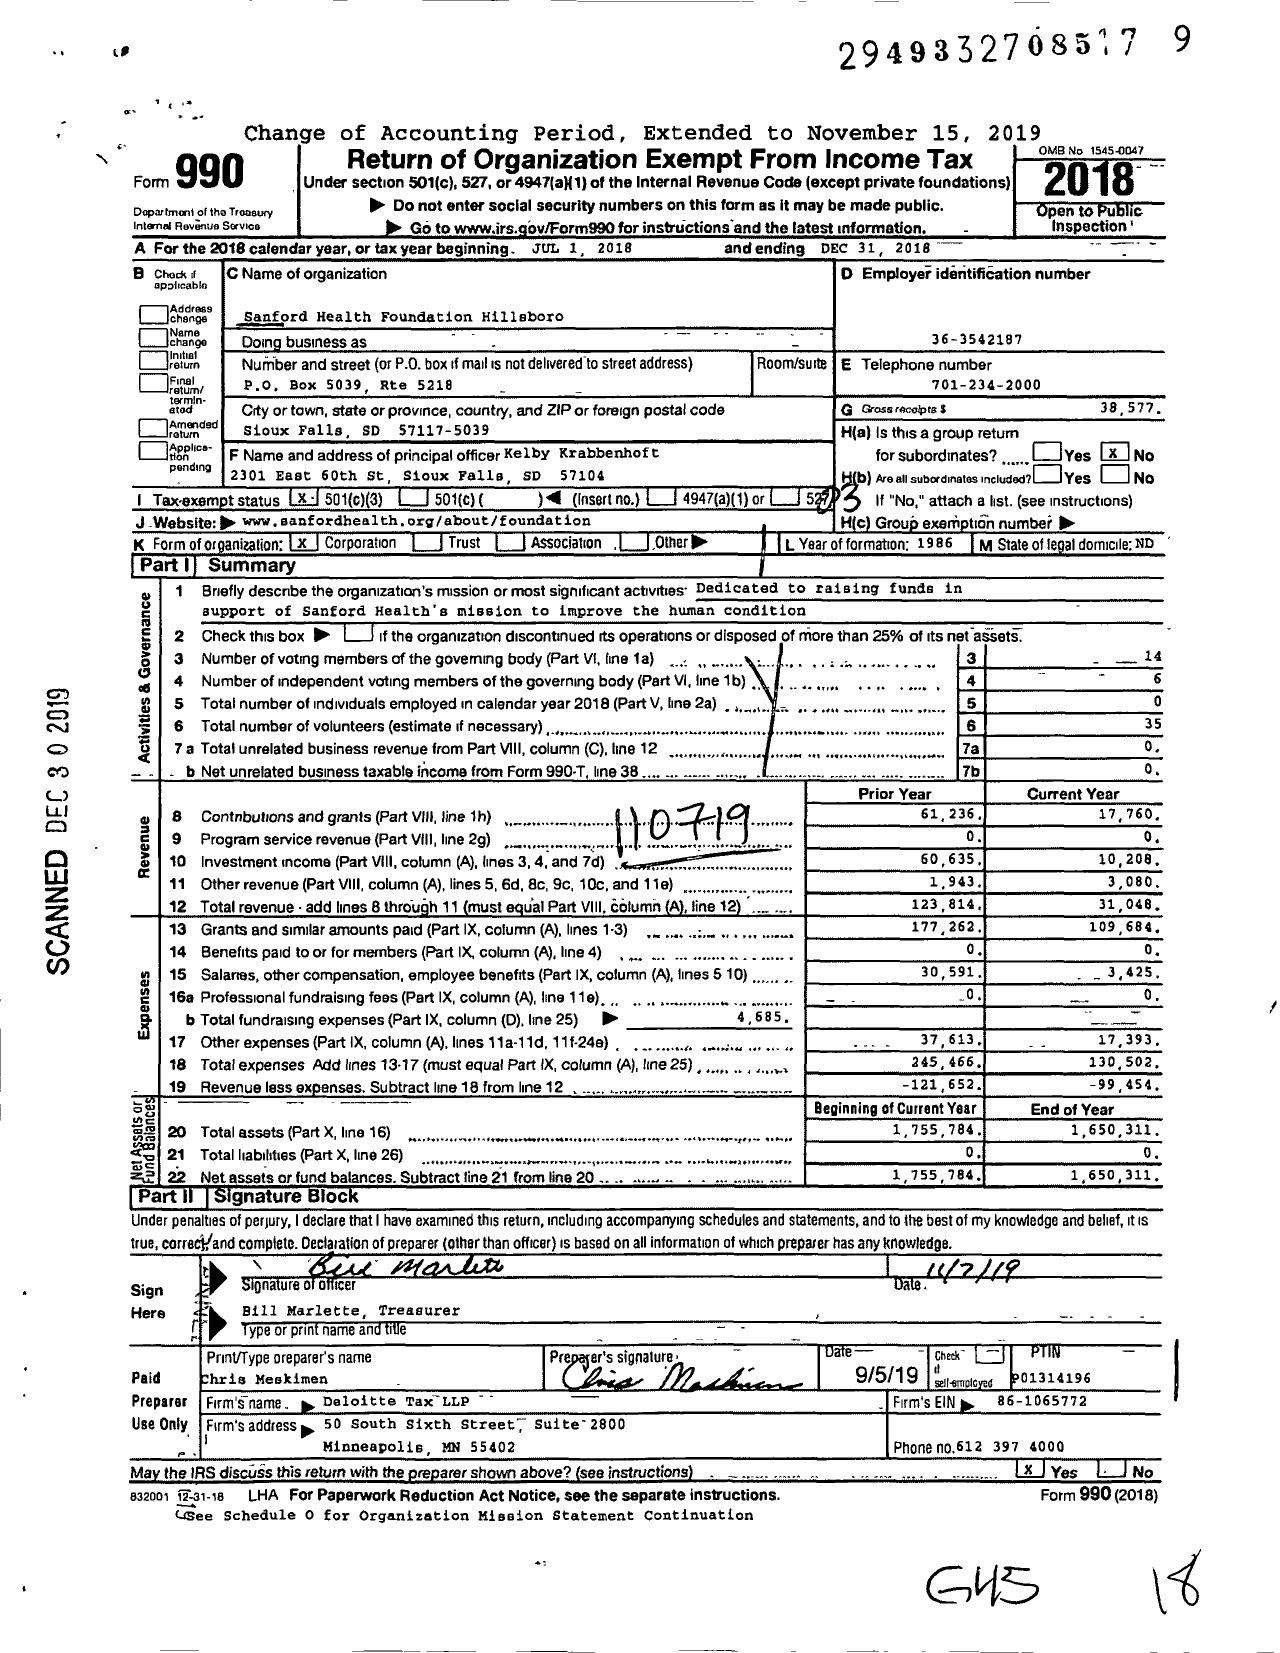 Image of first page of 2018 Form 990 for Sanford Health Foundation Hillsboro